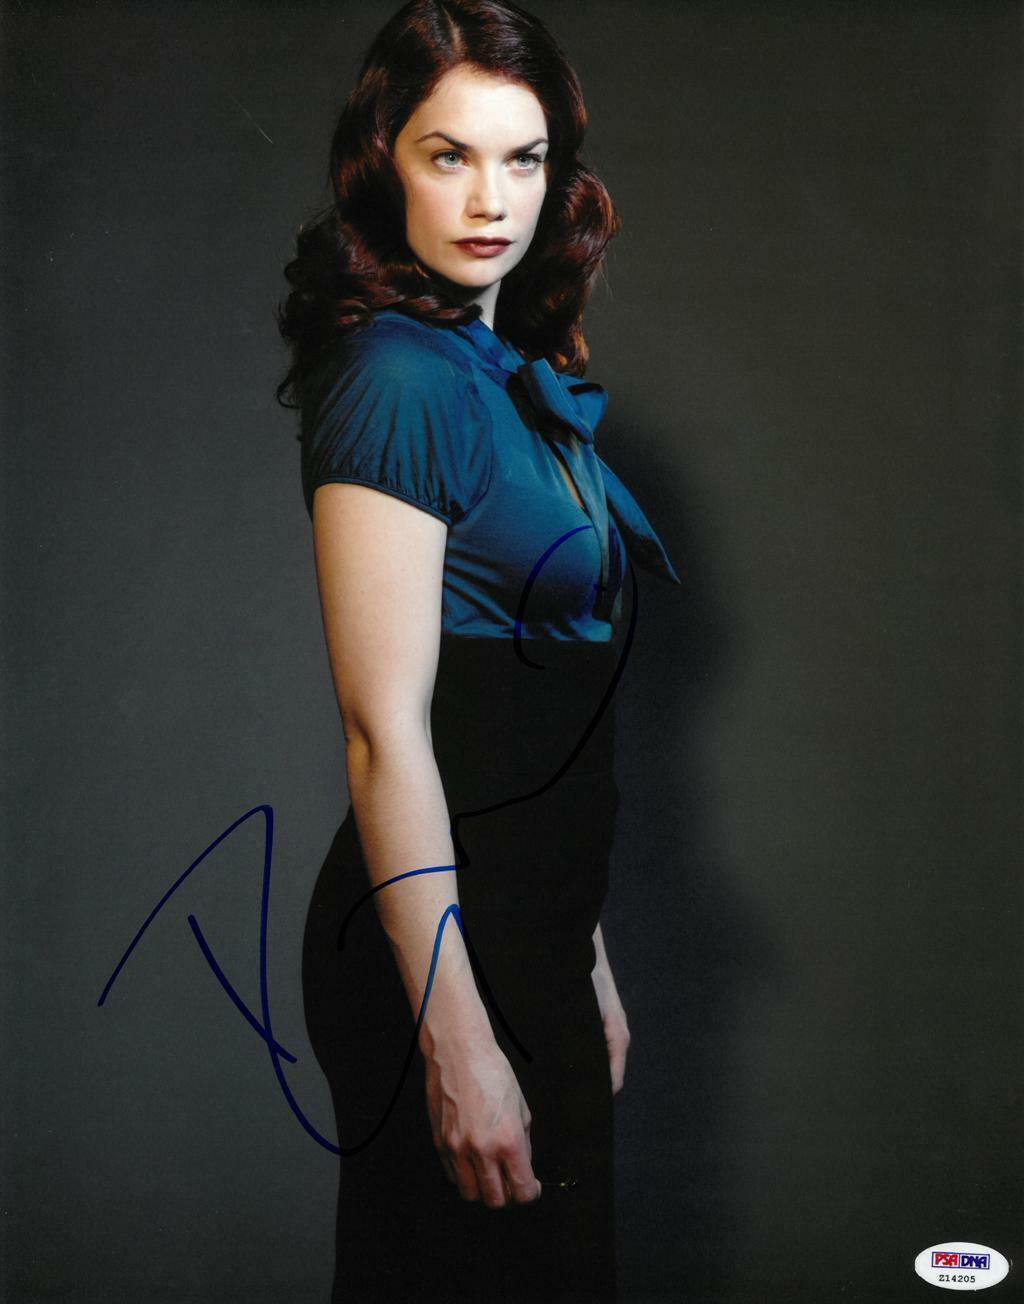 Ruth Wilson Signed Luther Authentic Autographed 11x14 Photo Poster painting PSA/DNA #Z14205